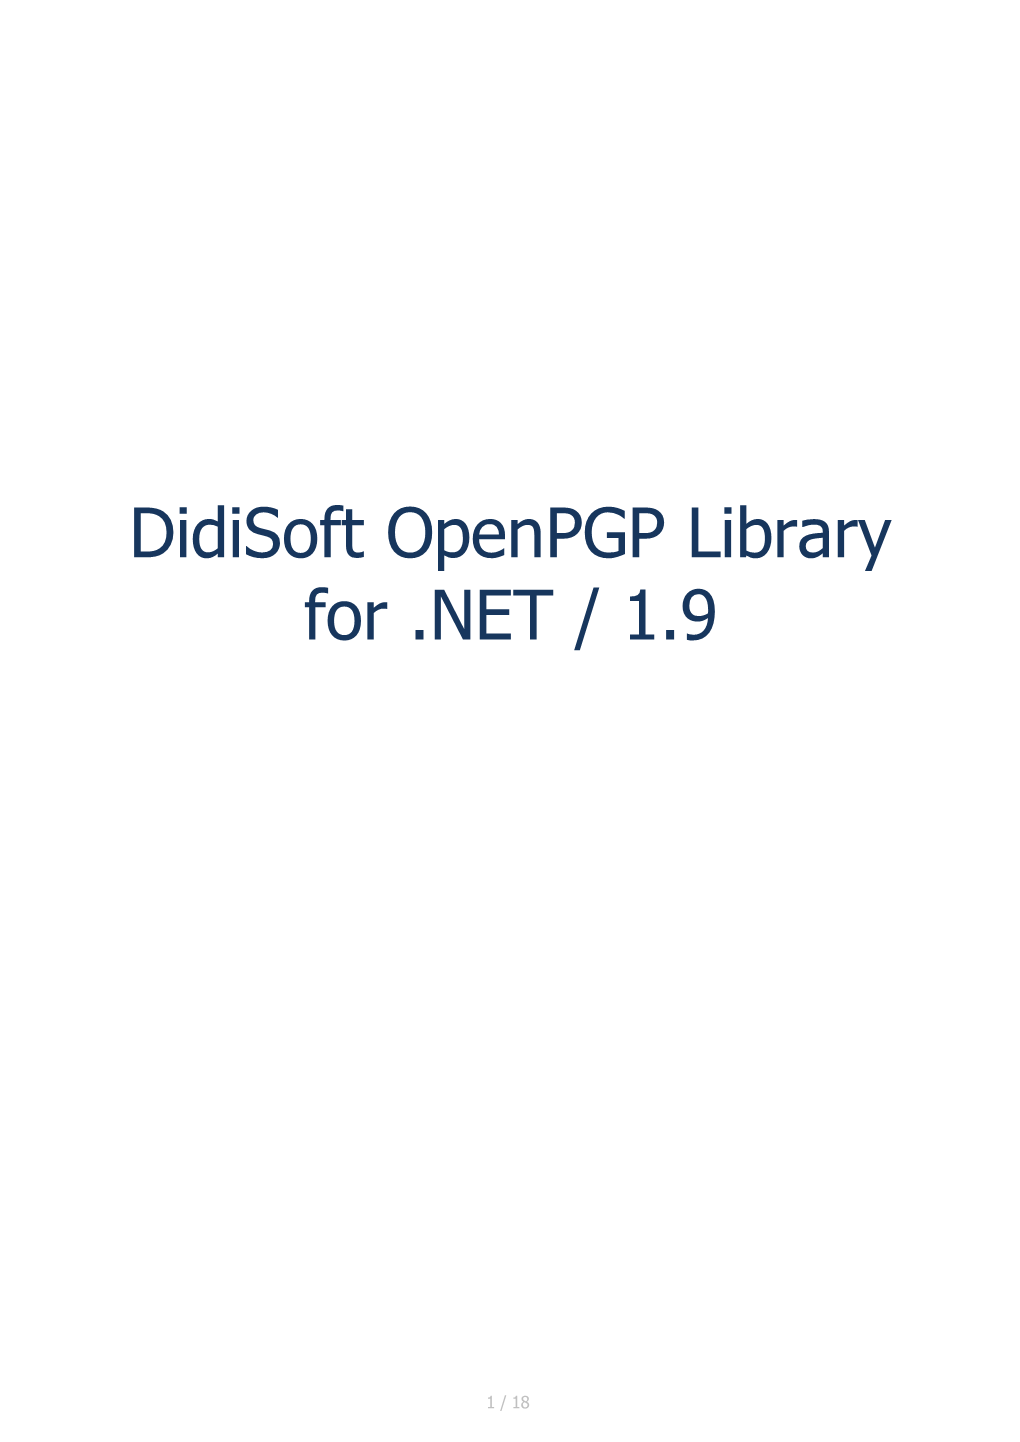 Didisoft Openpgp Library for .NET / 1.9